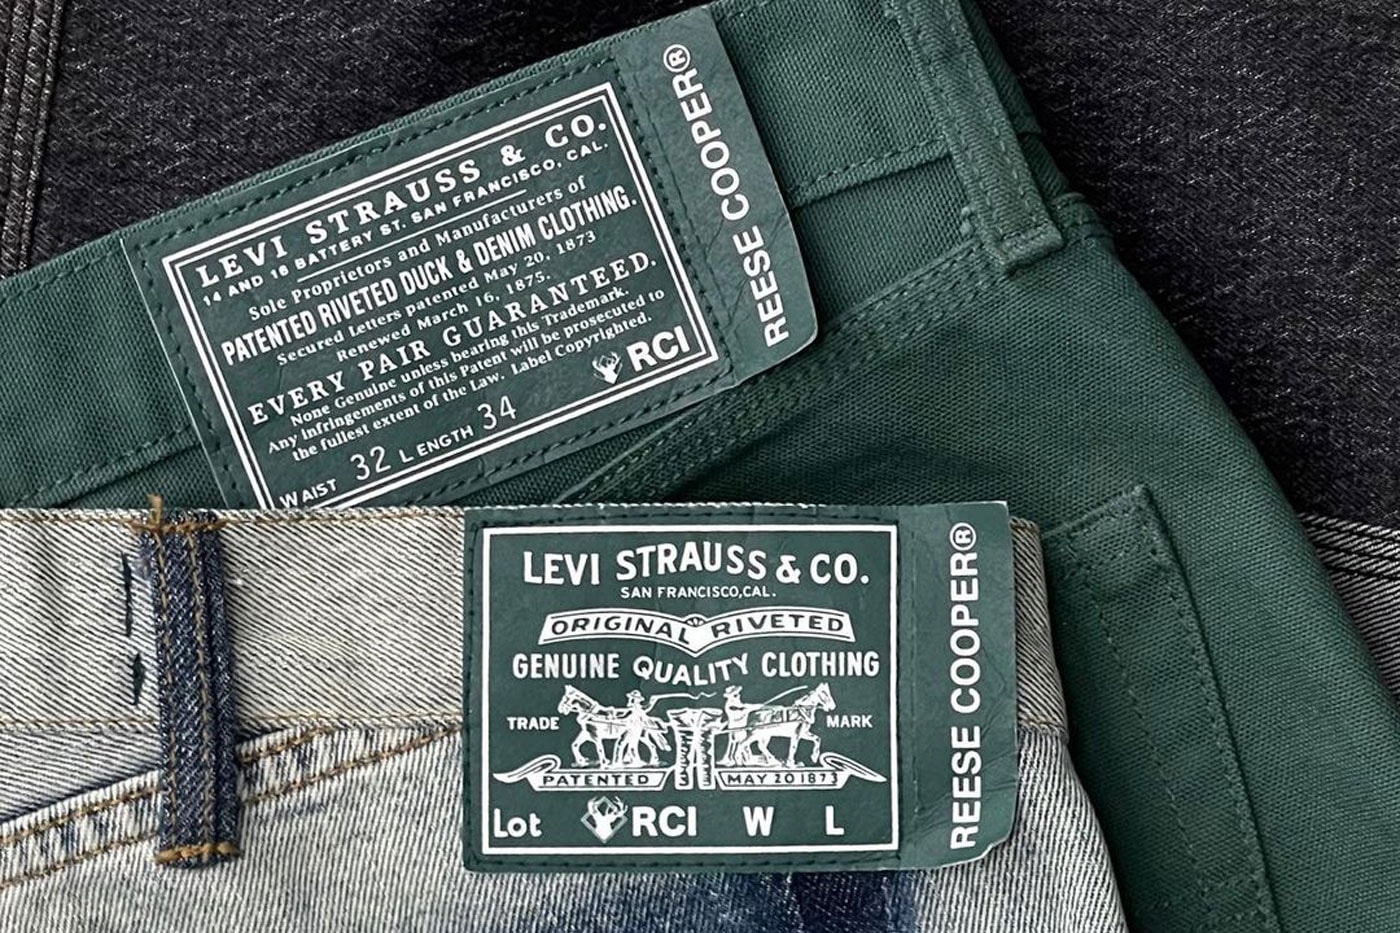 Reese Cooper Levis strauss white Collaboration green denim blue light wash jacrons fabric tags riveted los angeles jeans release info teaser